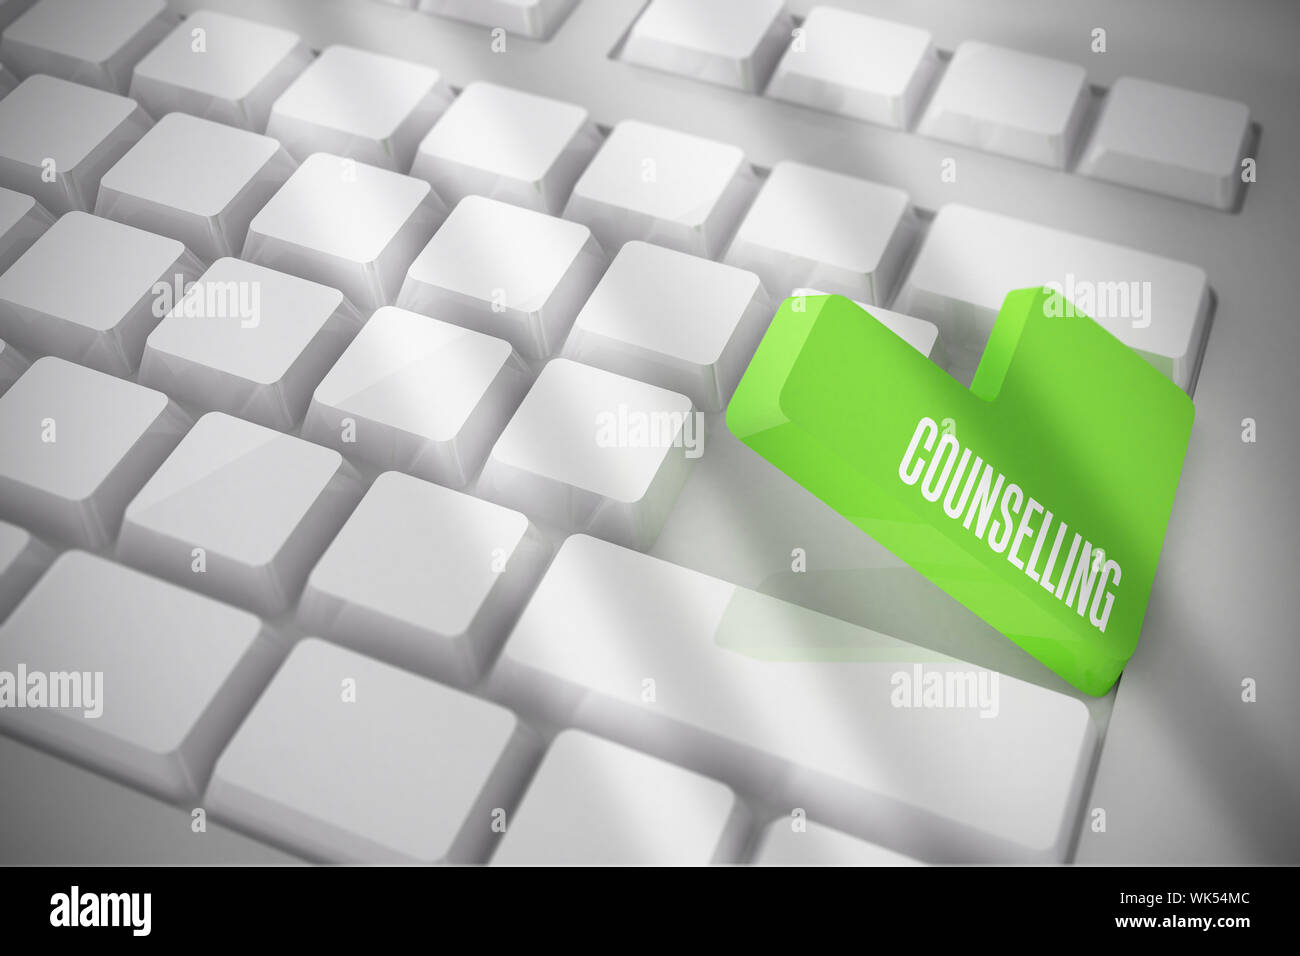 The word counselling on white keyboard with green key Stock Photo